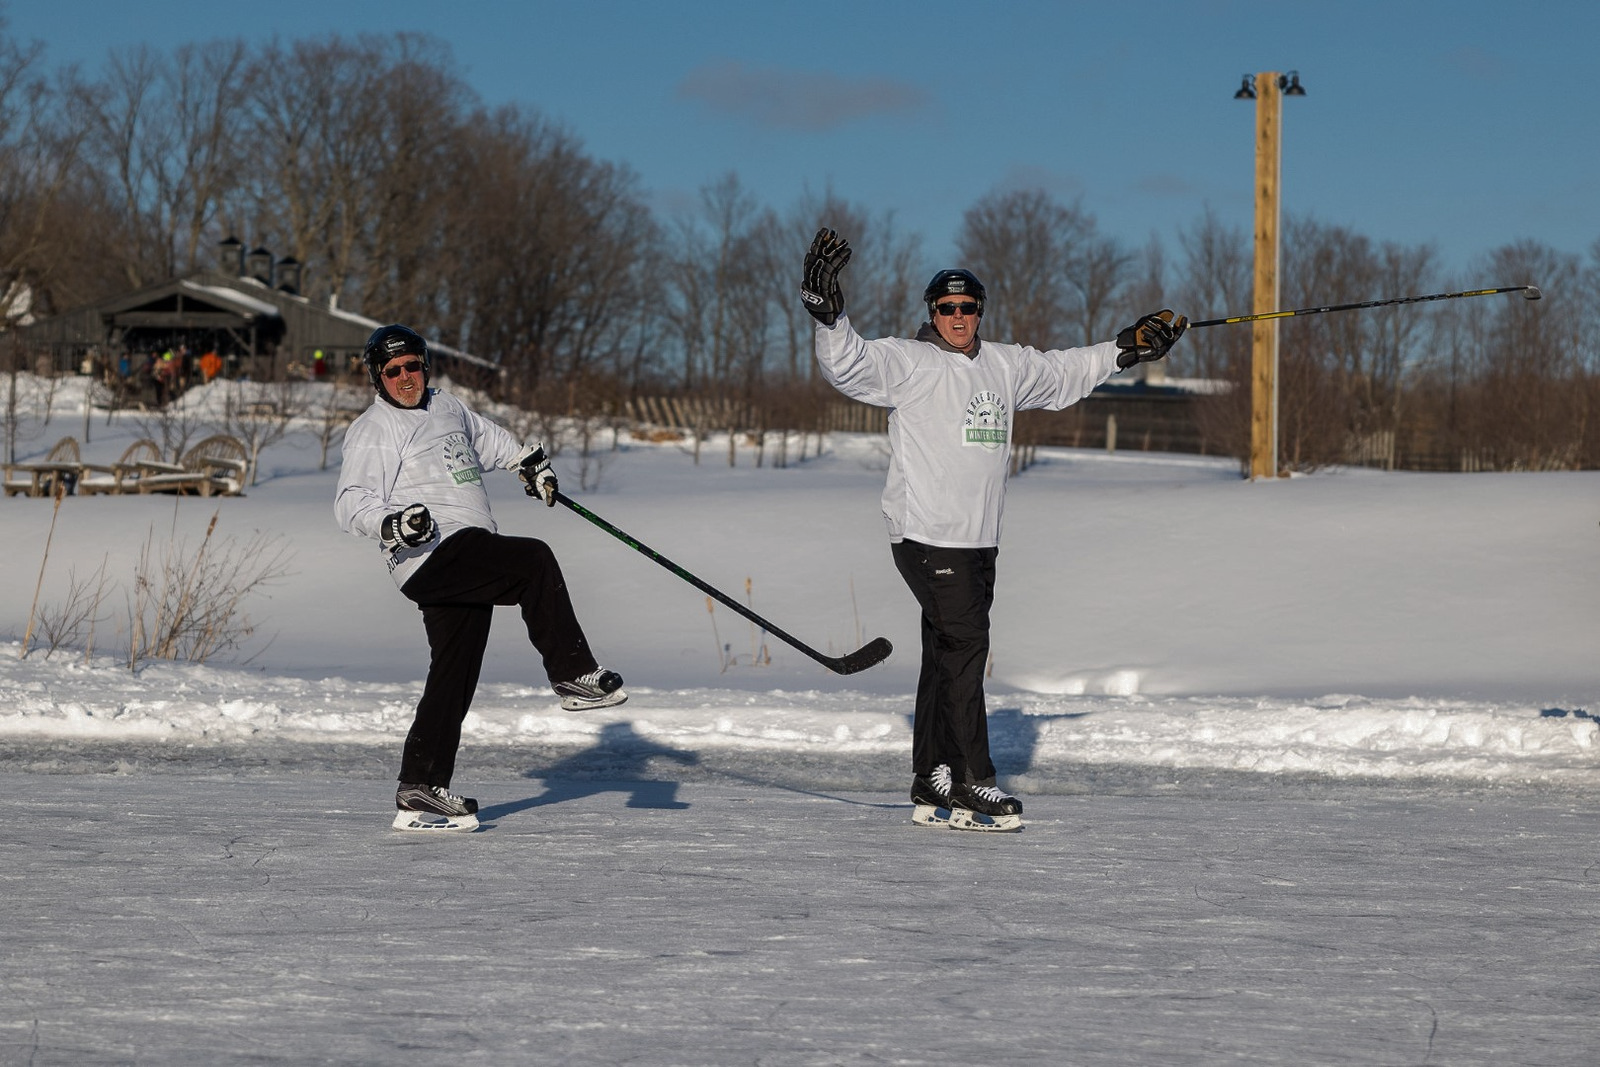 Ted Markle and another player from the 2022 Braestone Winter Classic Pond Hockey Tournament, celebrate a goal.